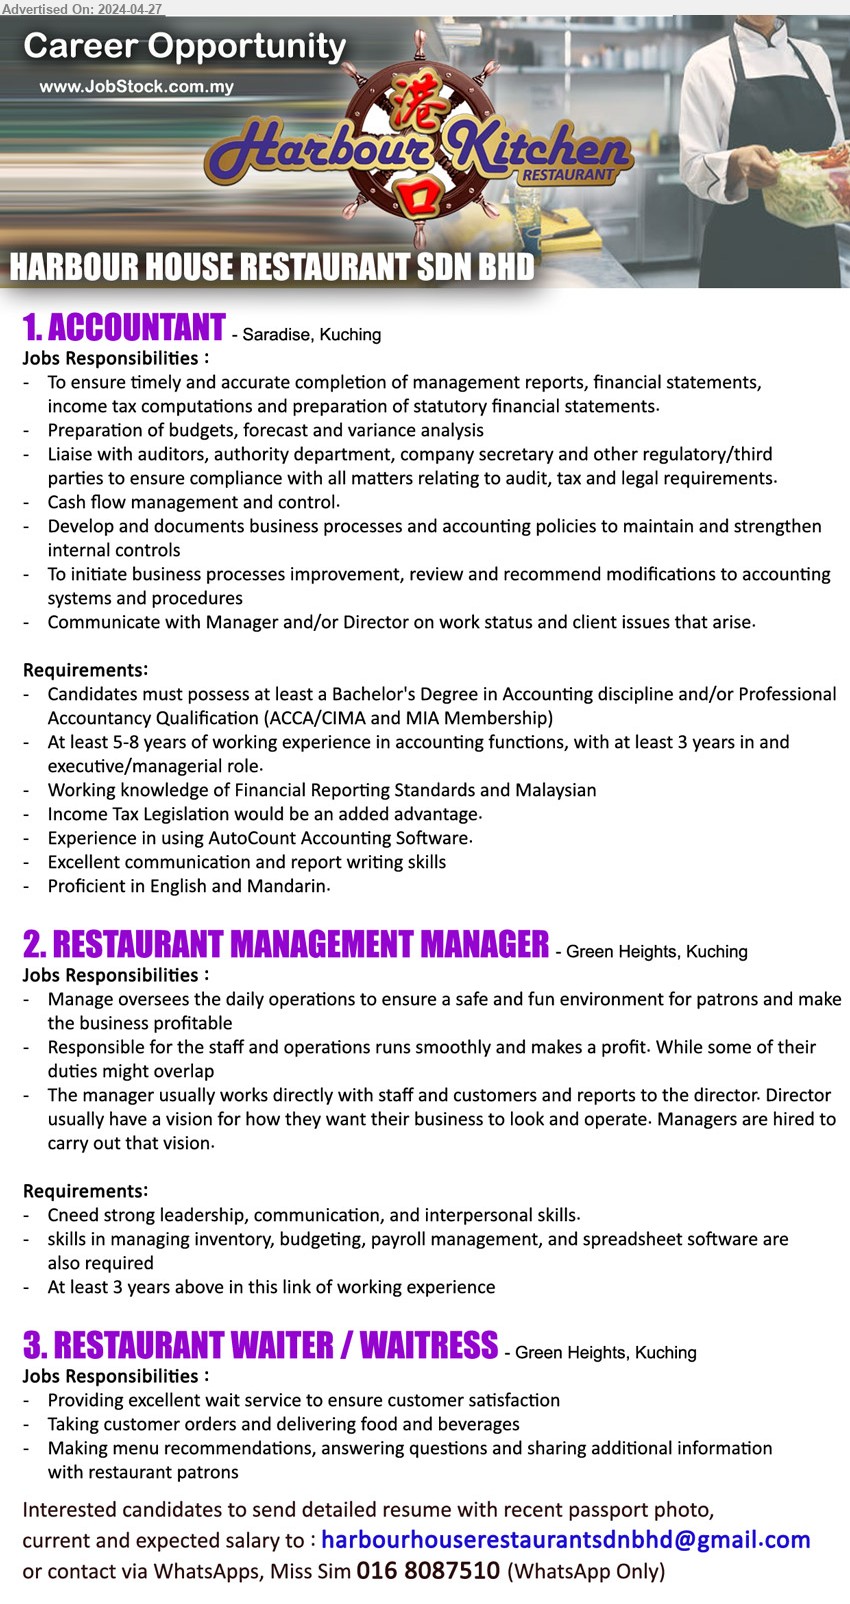 HARBOUR HOUSE RESTAURANT SDN BHD - 1. ACCOUNTANT  (Saradise, Kuching), Bachelor's Degree in Accounting discipline and/or Professional Accountancy Qualification (ACCA/CIMA and MIA Membership),...
2. RESTAURANT MANAGEMENT MANAGER  (Green Heights, Kuching), skills in managing inventory, budgeting, payroll management, and spreadsheet software are also required,...
3. RESTAURANT WAITER / WAITRESS  (Green Heights, Kuching), Providing excellent wait service to ensure customer satisfaction,...
WhatsApps, Miss Sim 016 8087510 (WhatsApp Only) / Email resume to ...